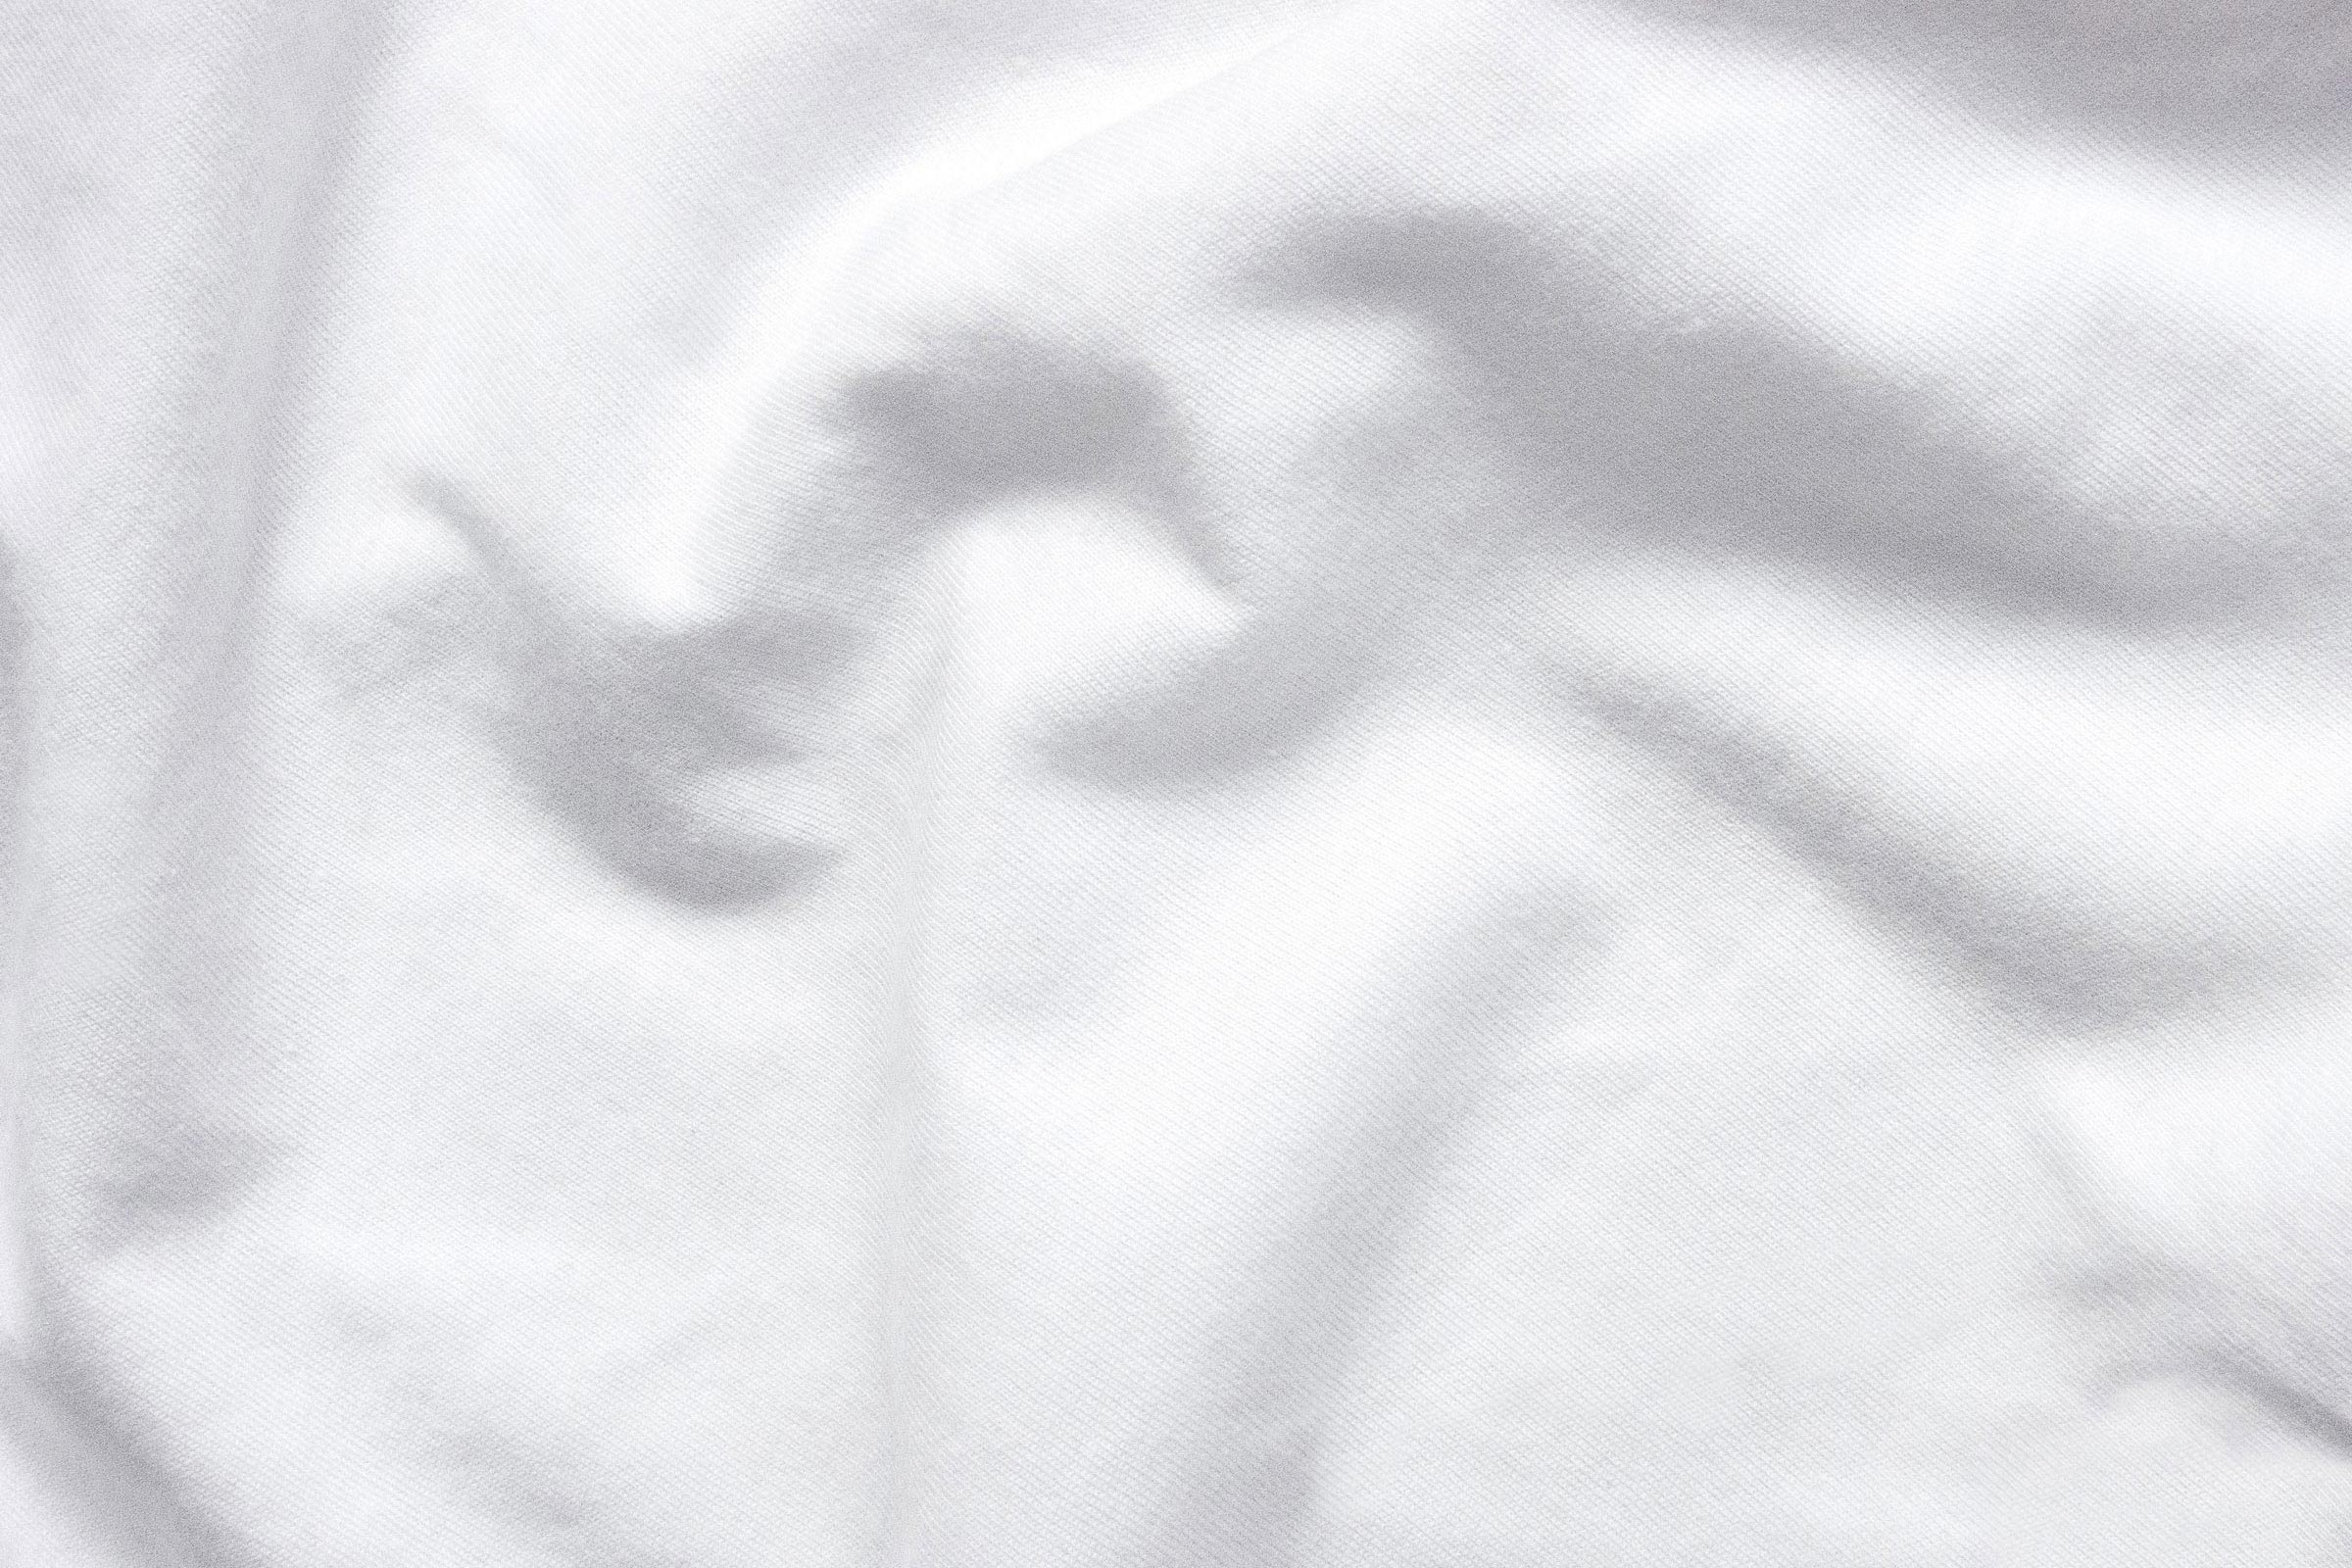 jersey-white-body-pillow-case-close-up-shot-by-sojao.jpg